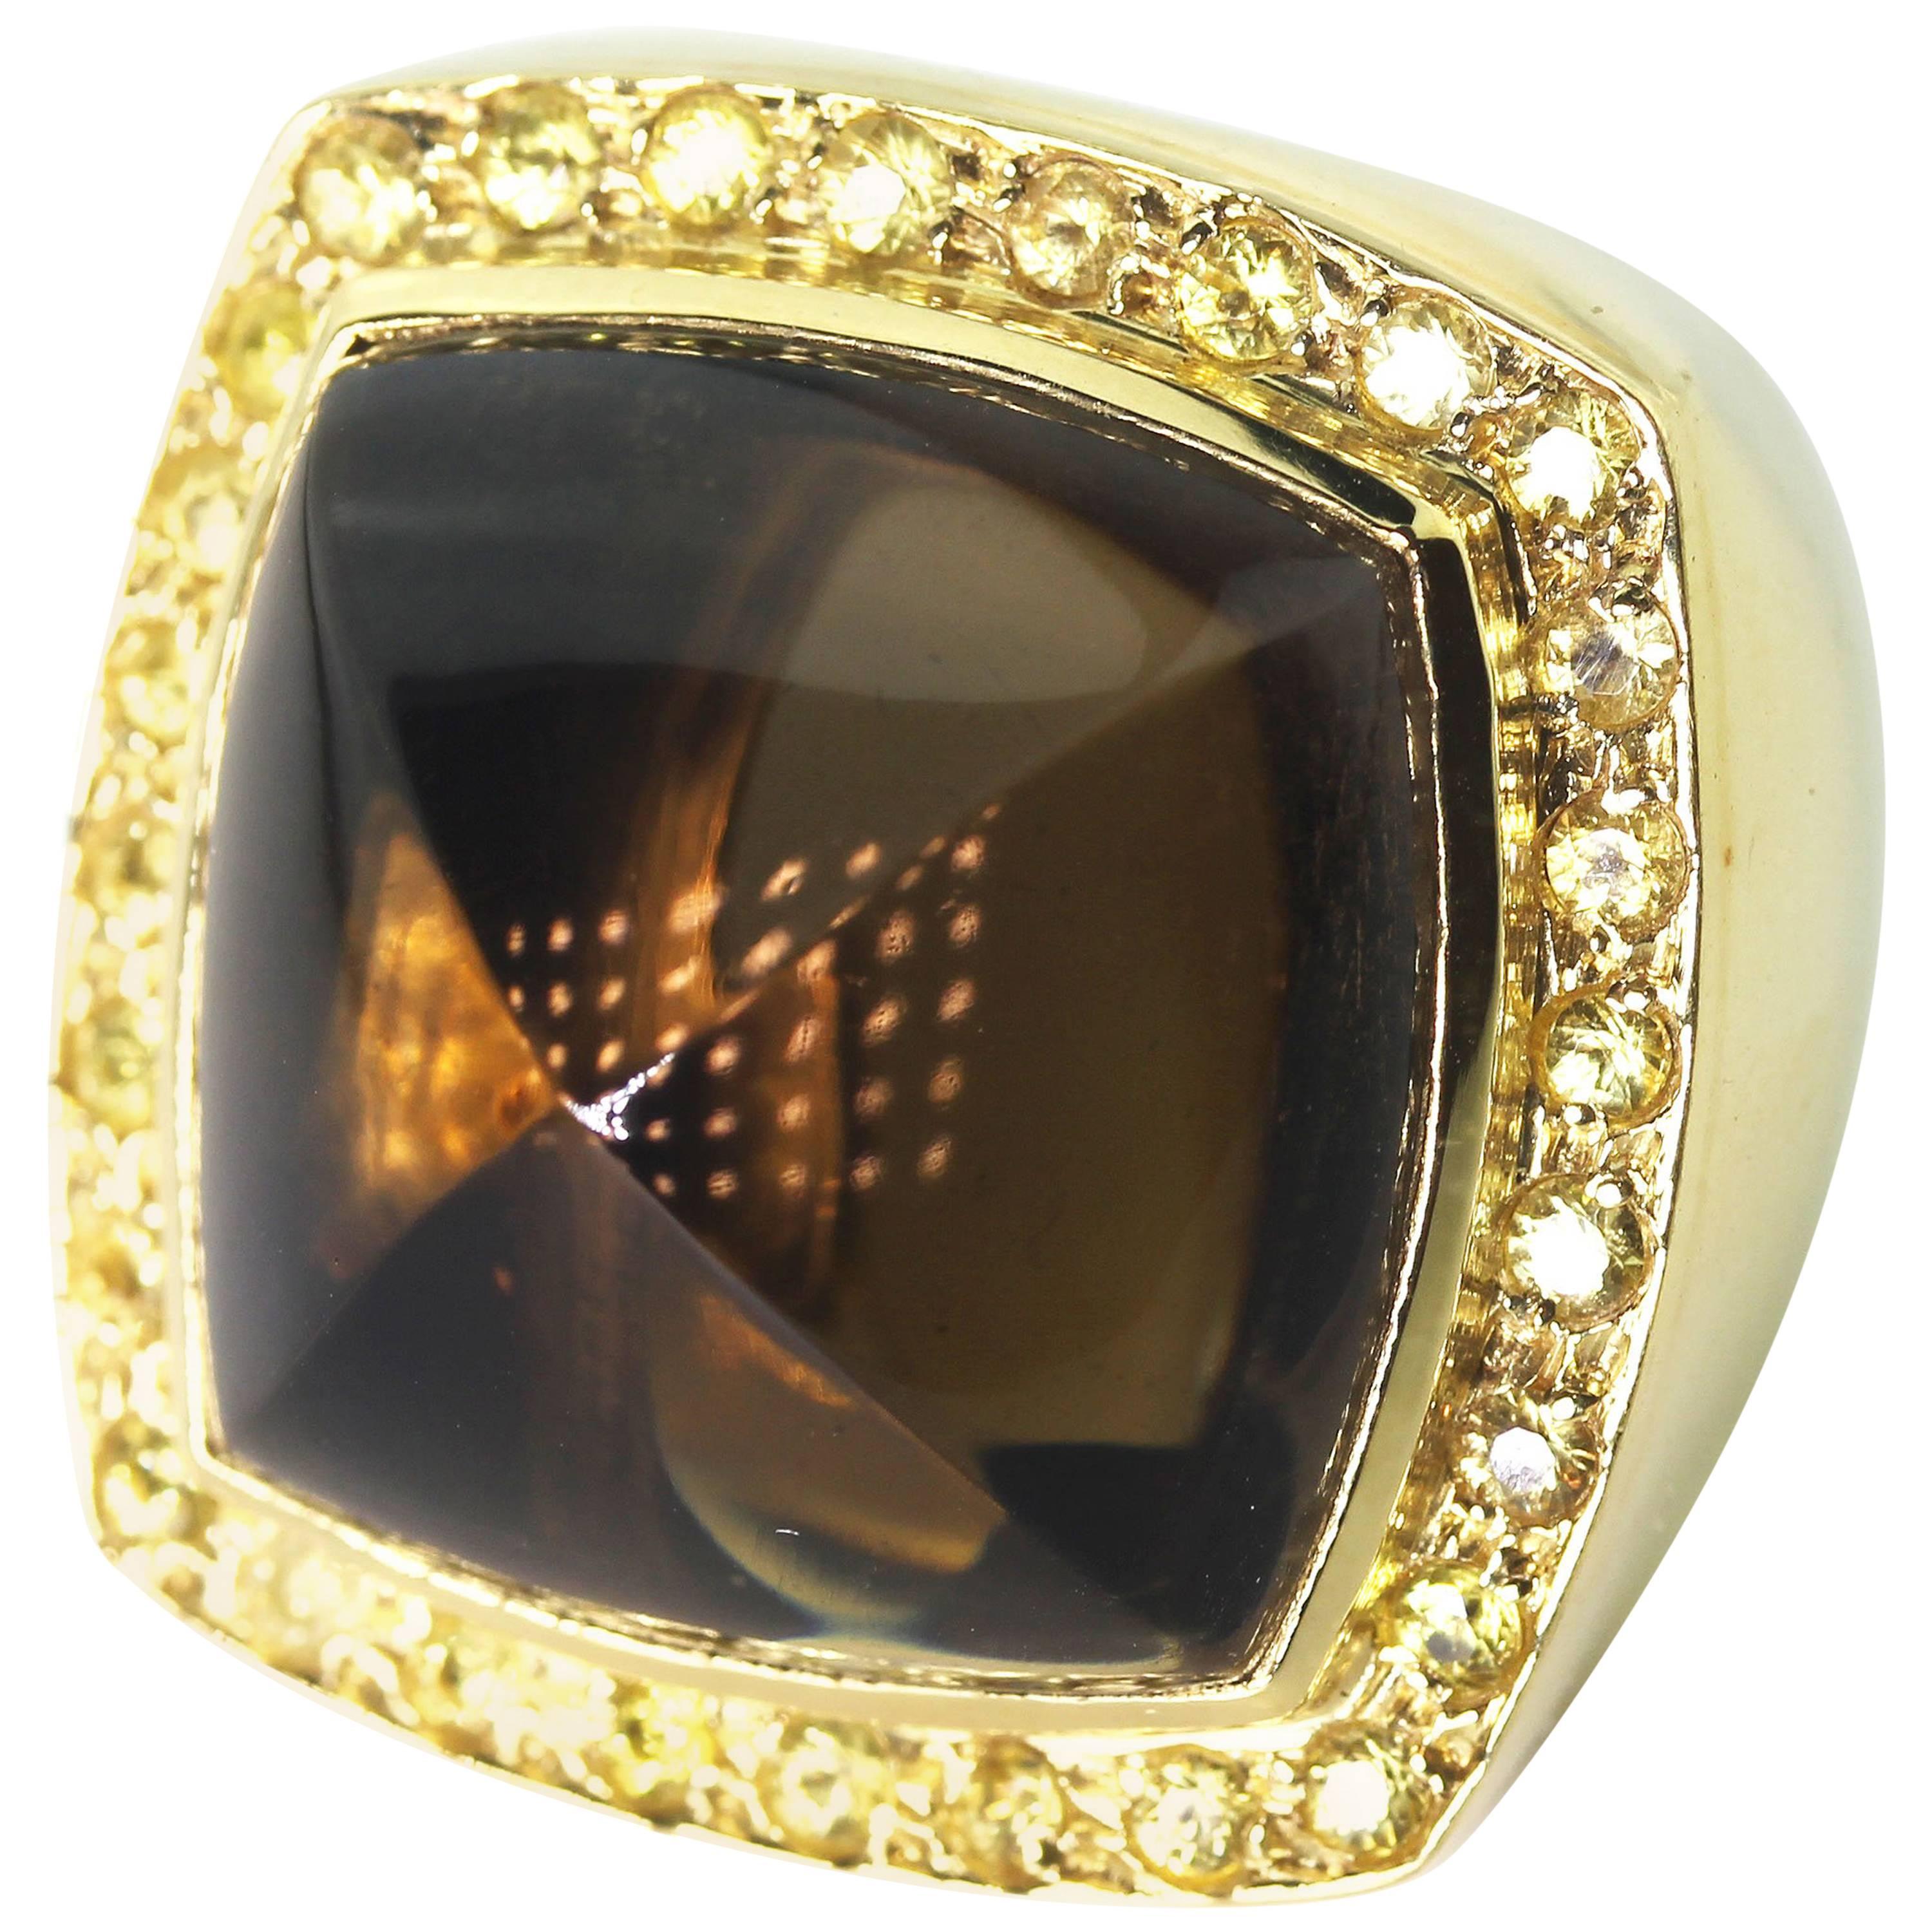 Beautiful huge 18Kt yellow gold ring set with large 32.4 carat Smoky Quartz enhanced with sparkling beautiful 2.5 carats brilliant yellow Sapphires.  This unique handmade ring is a size 7 (sizable). The Smoky Quartz measures 20 mm x 20 mm and the